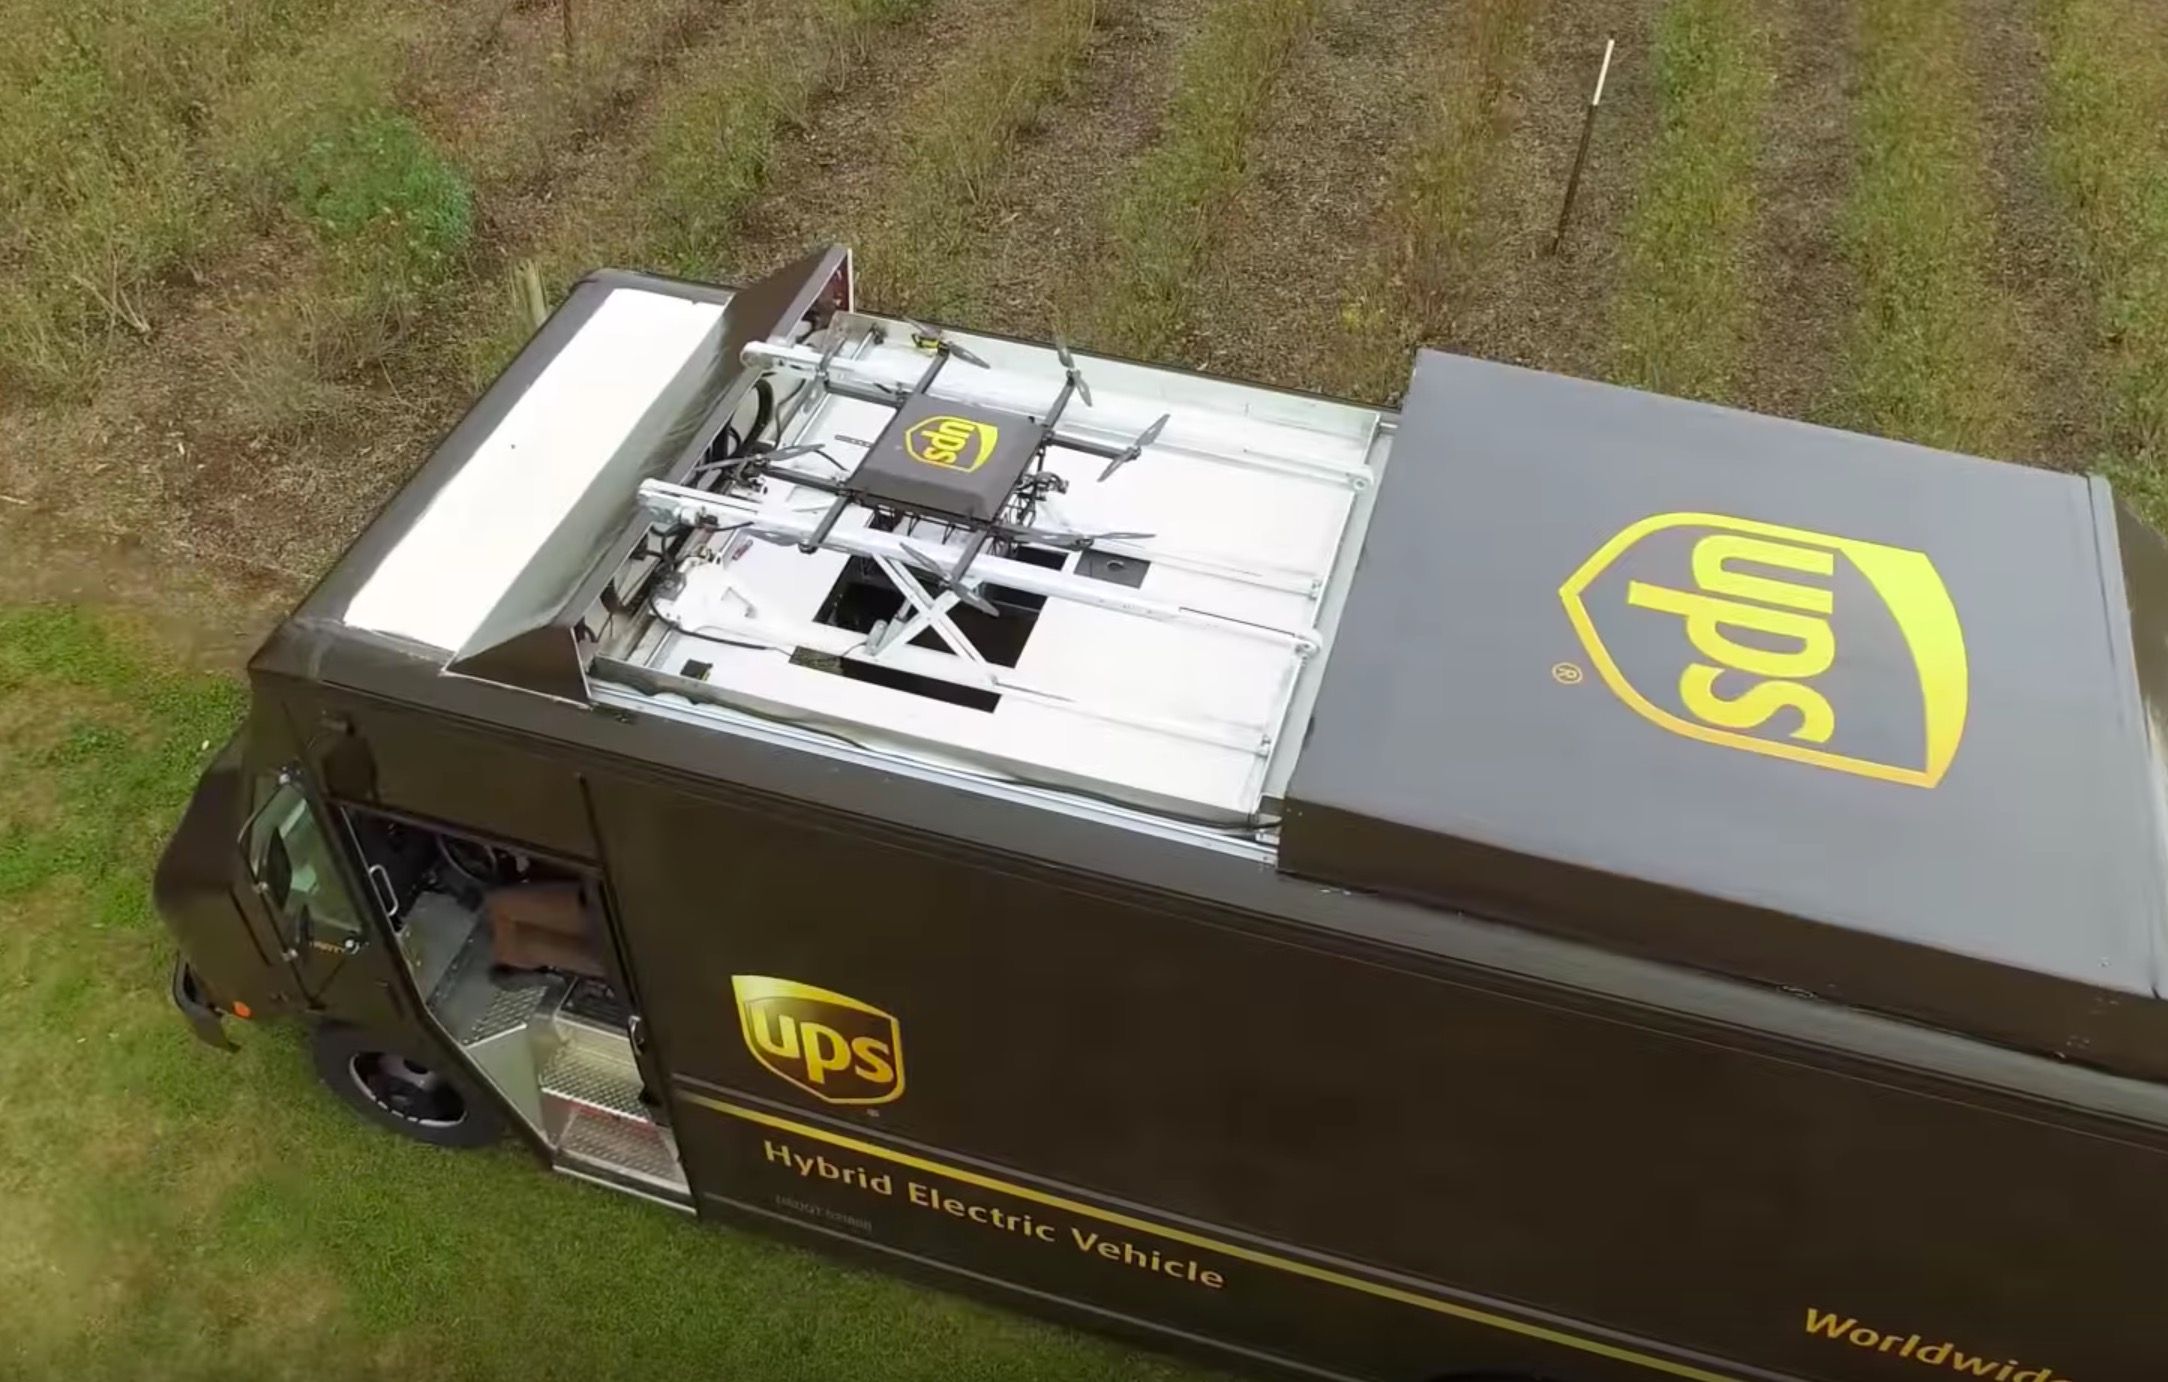 watch ups test its new delivery van that spits out parcel carrying drones image 1